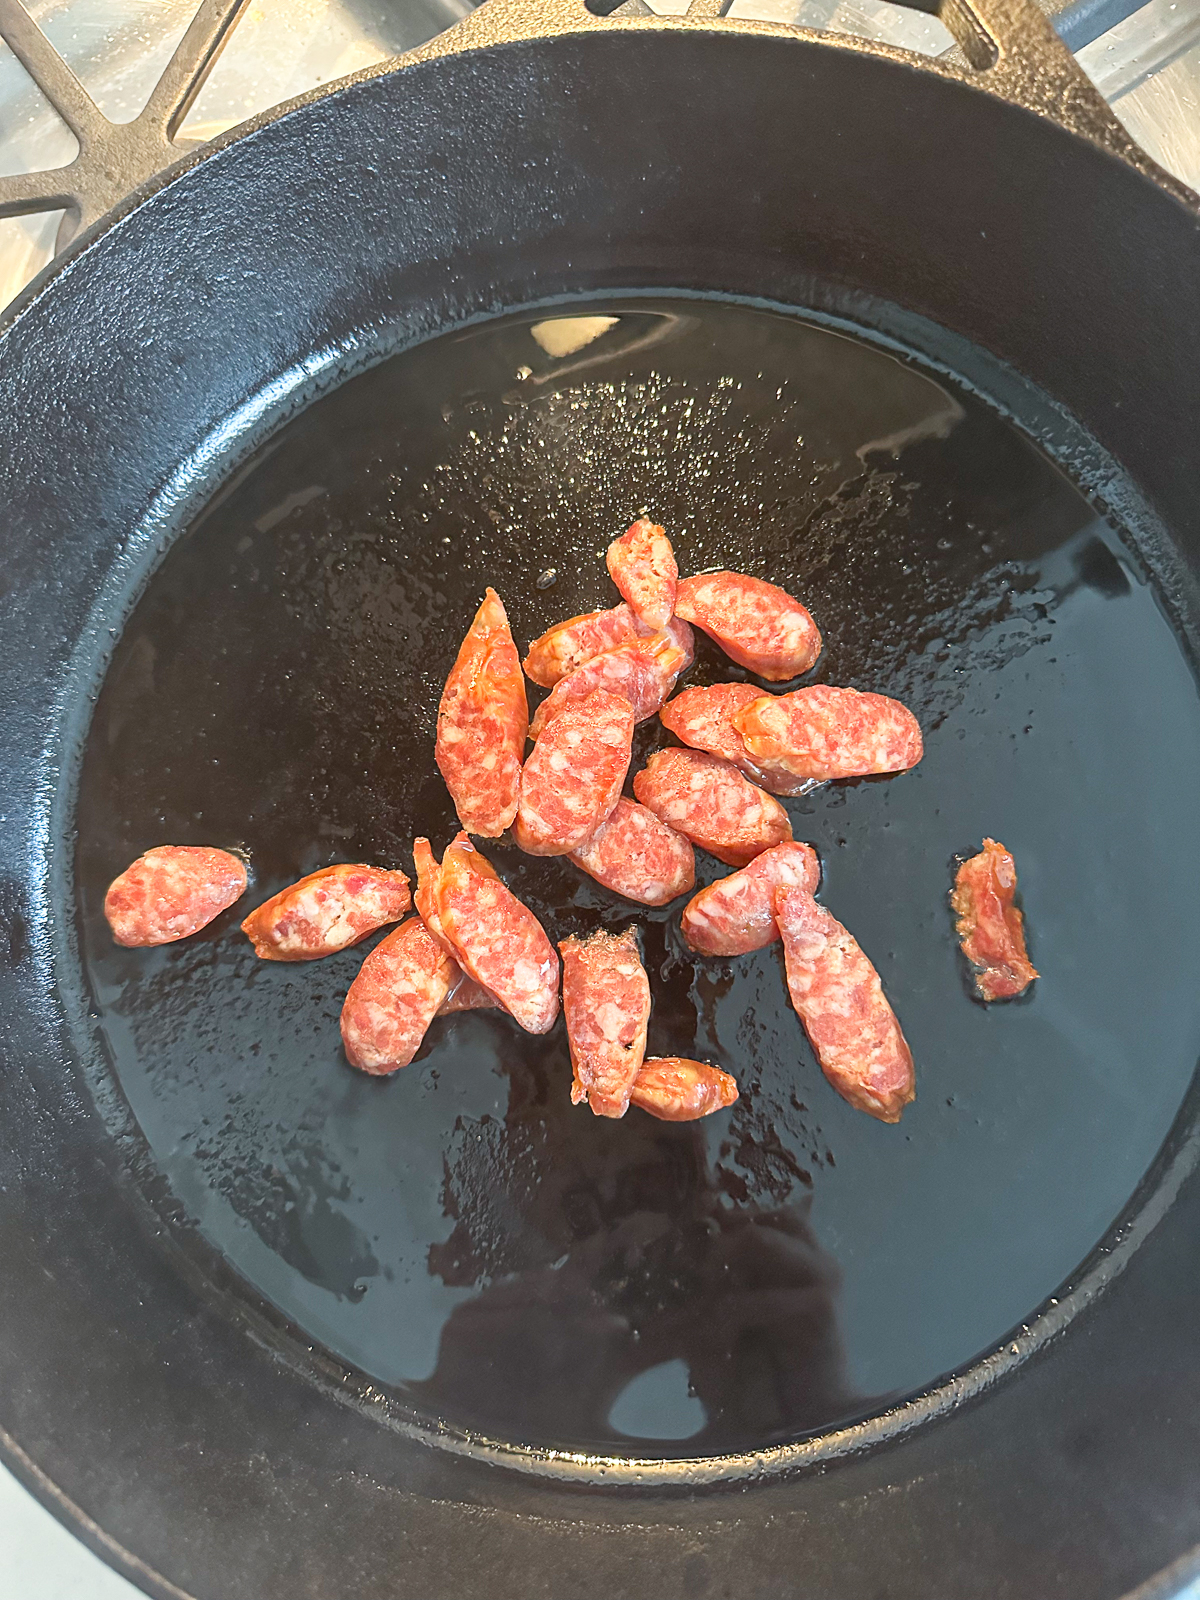 Frying chinese sausage in a black pan.